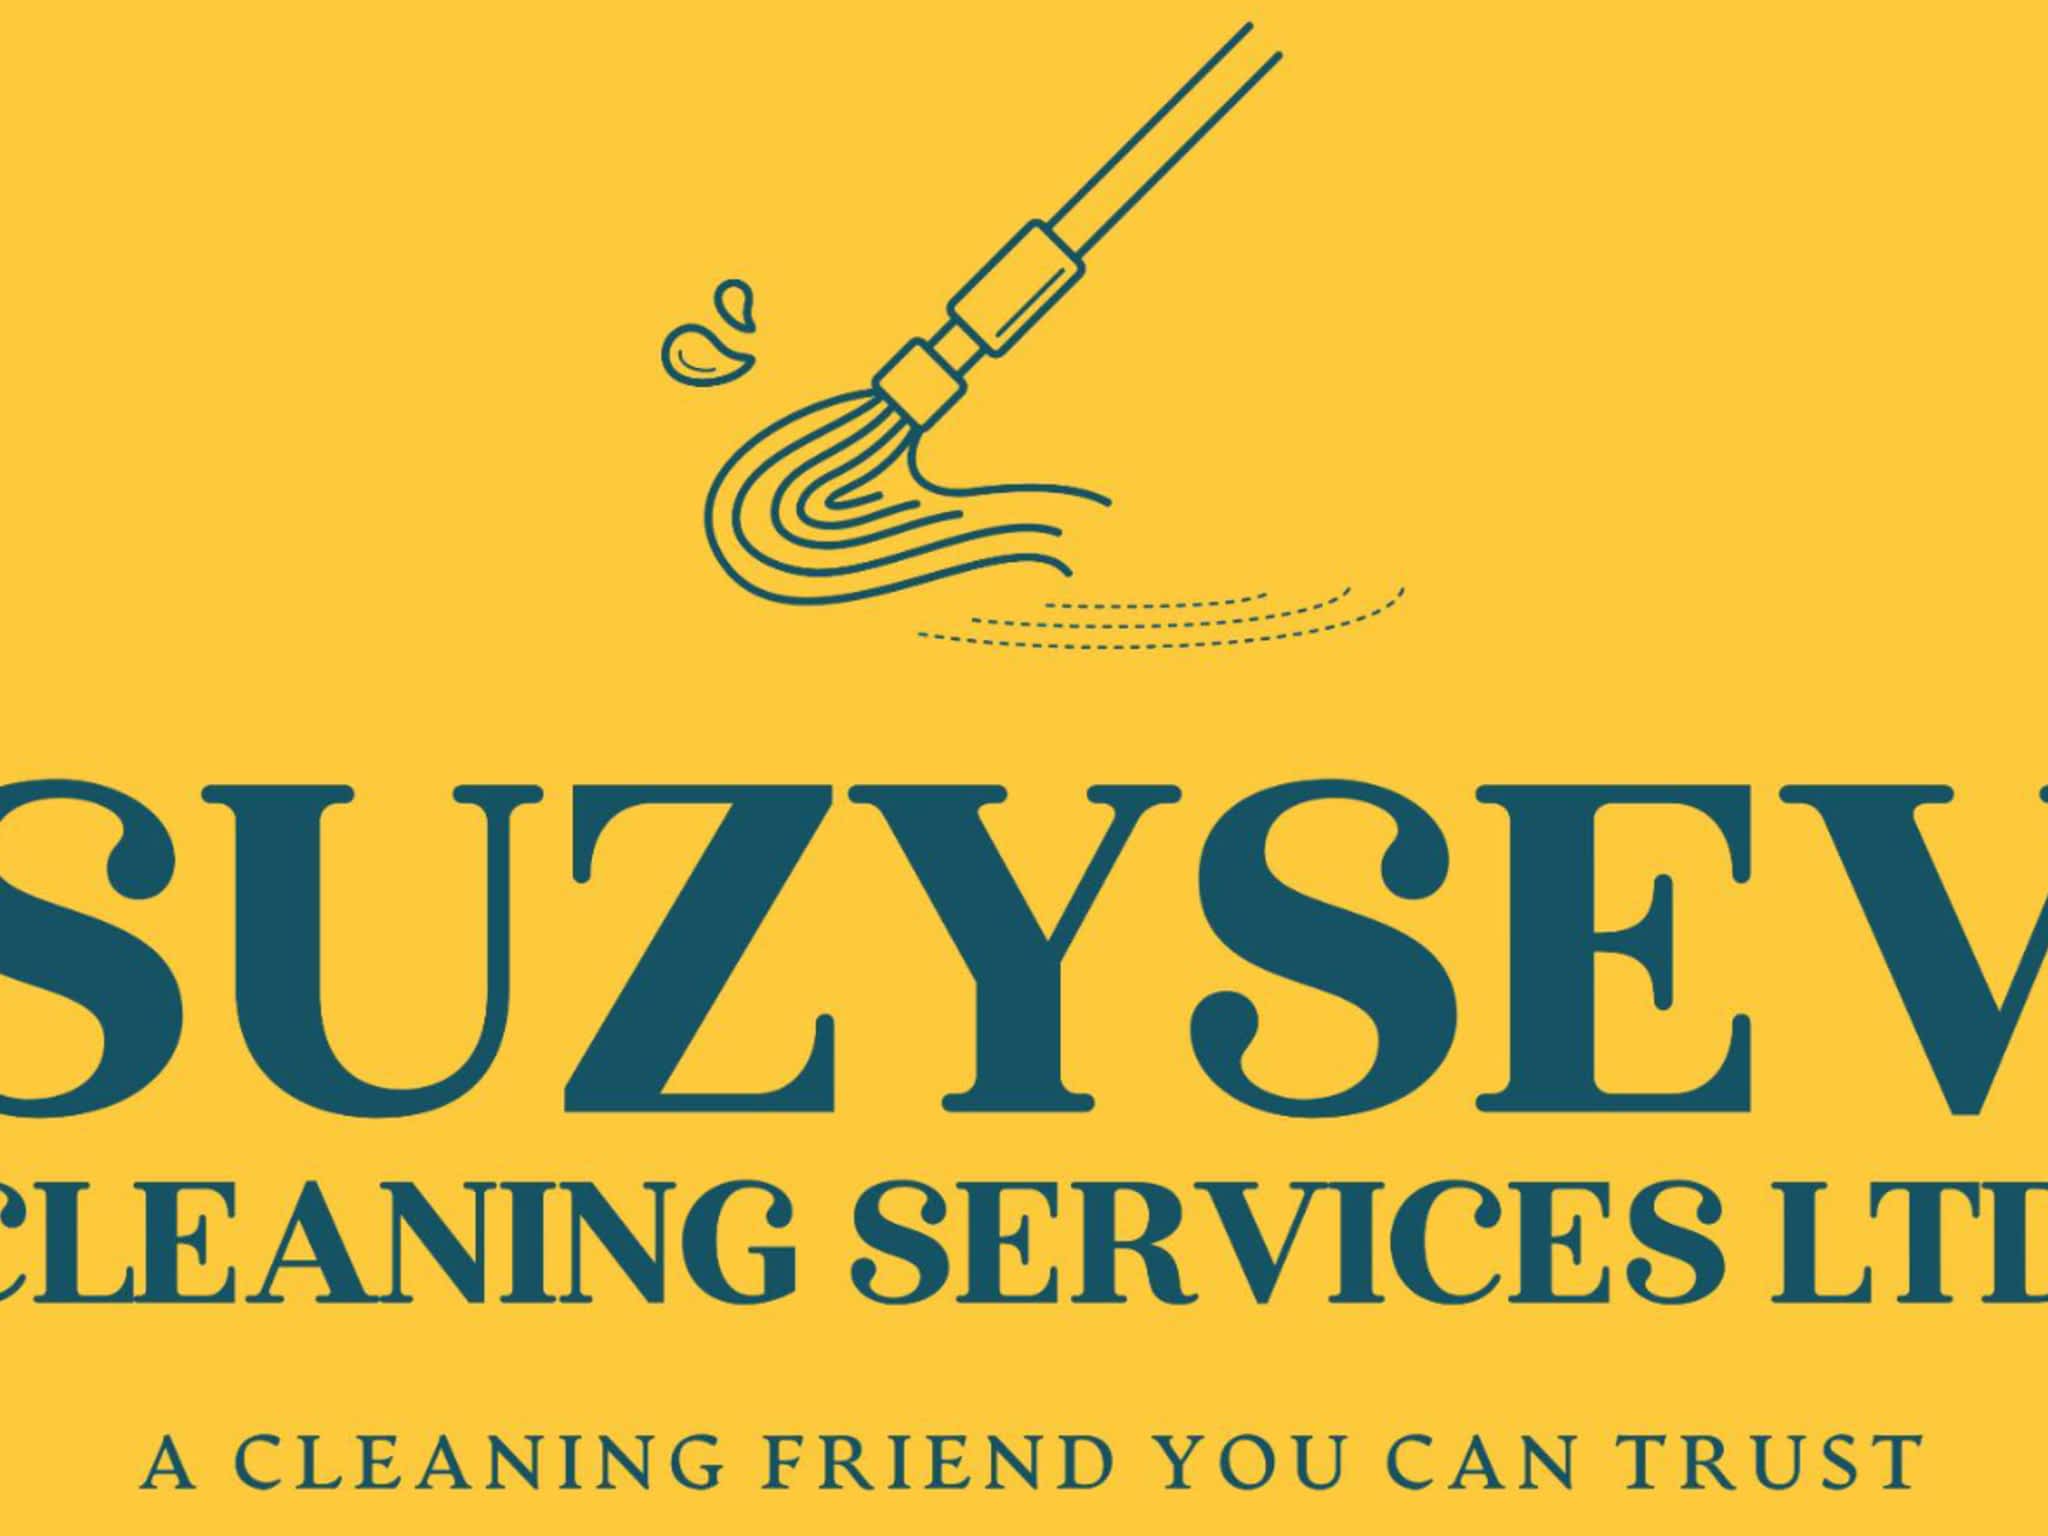 photo Suzysev Cleaning Services